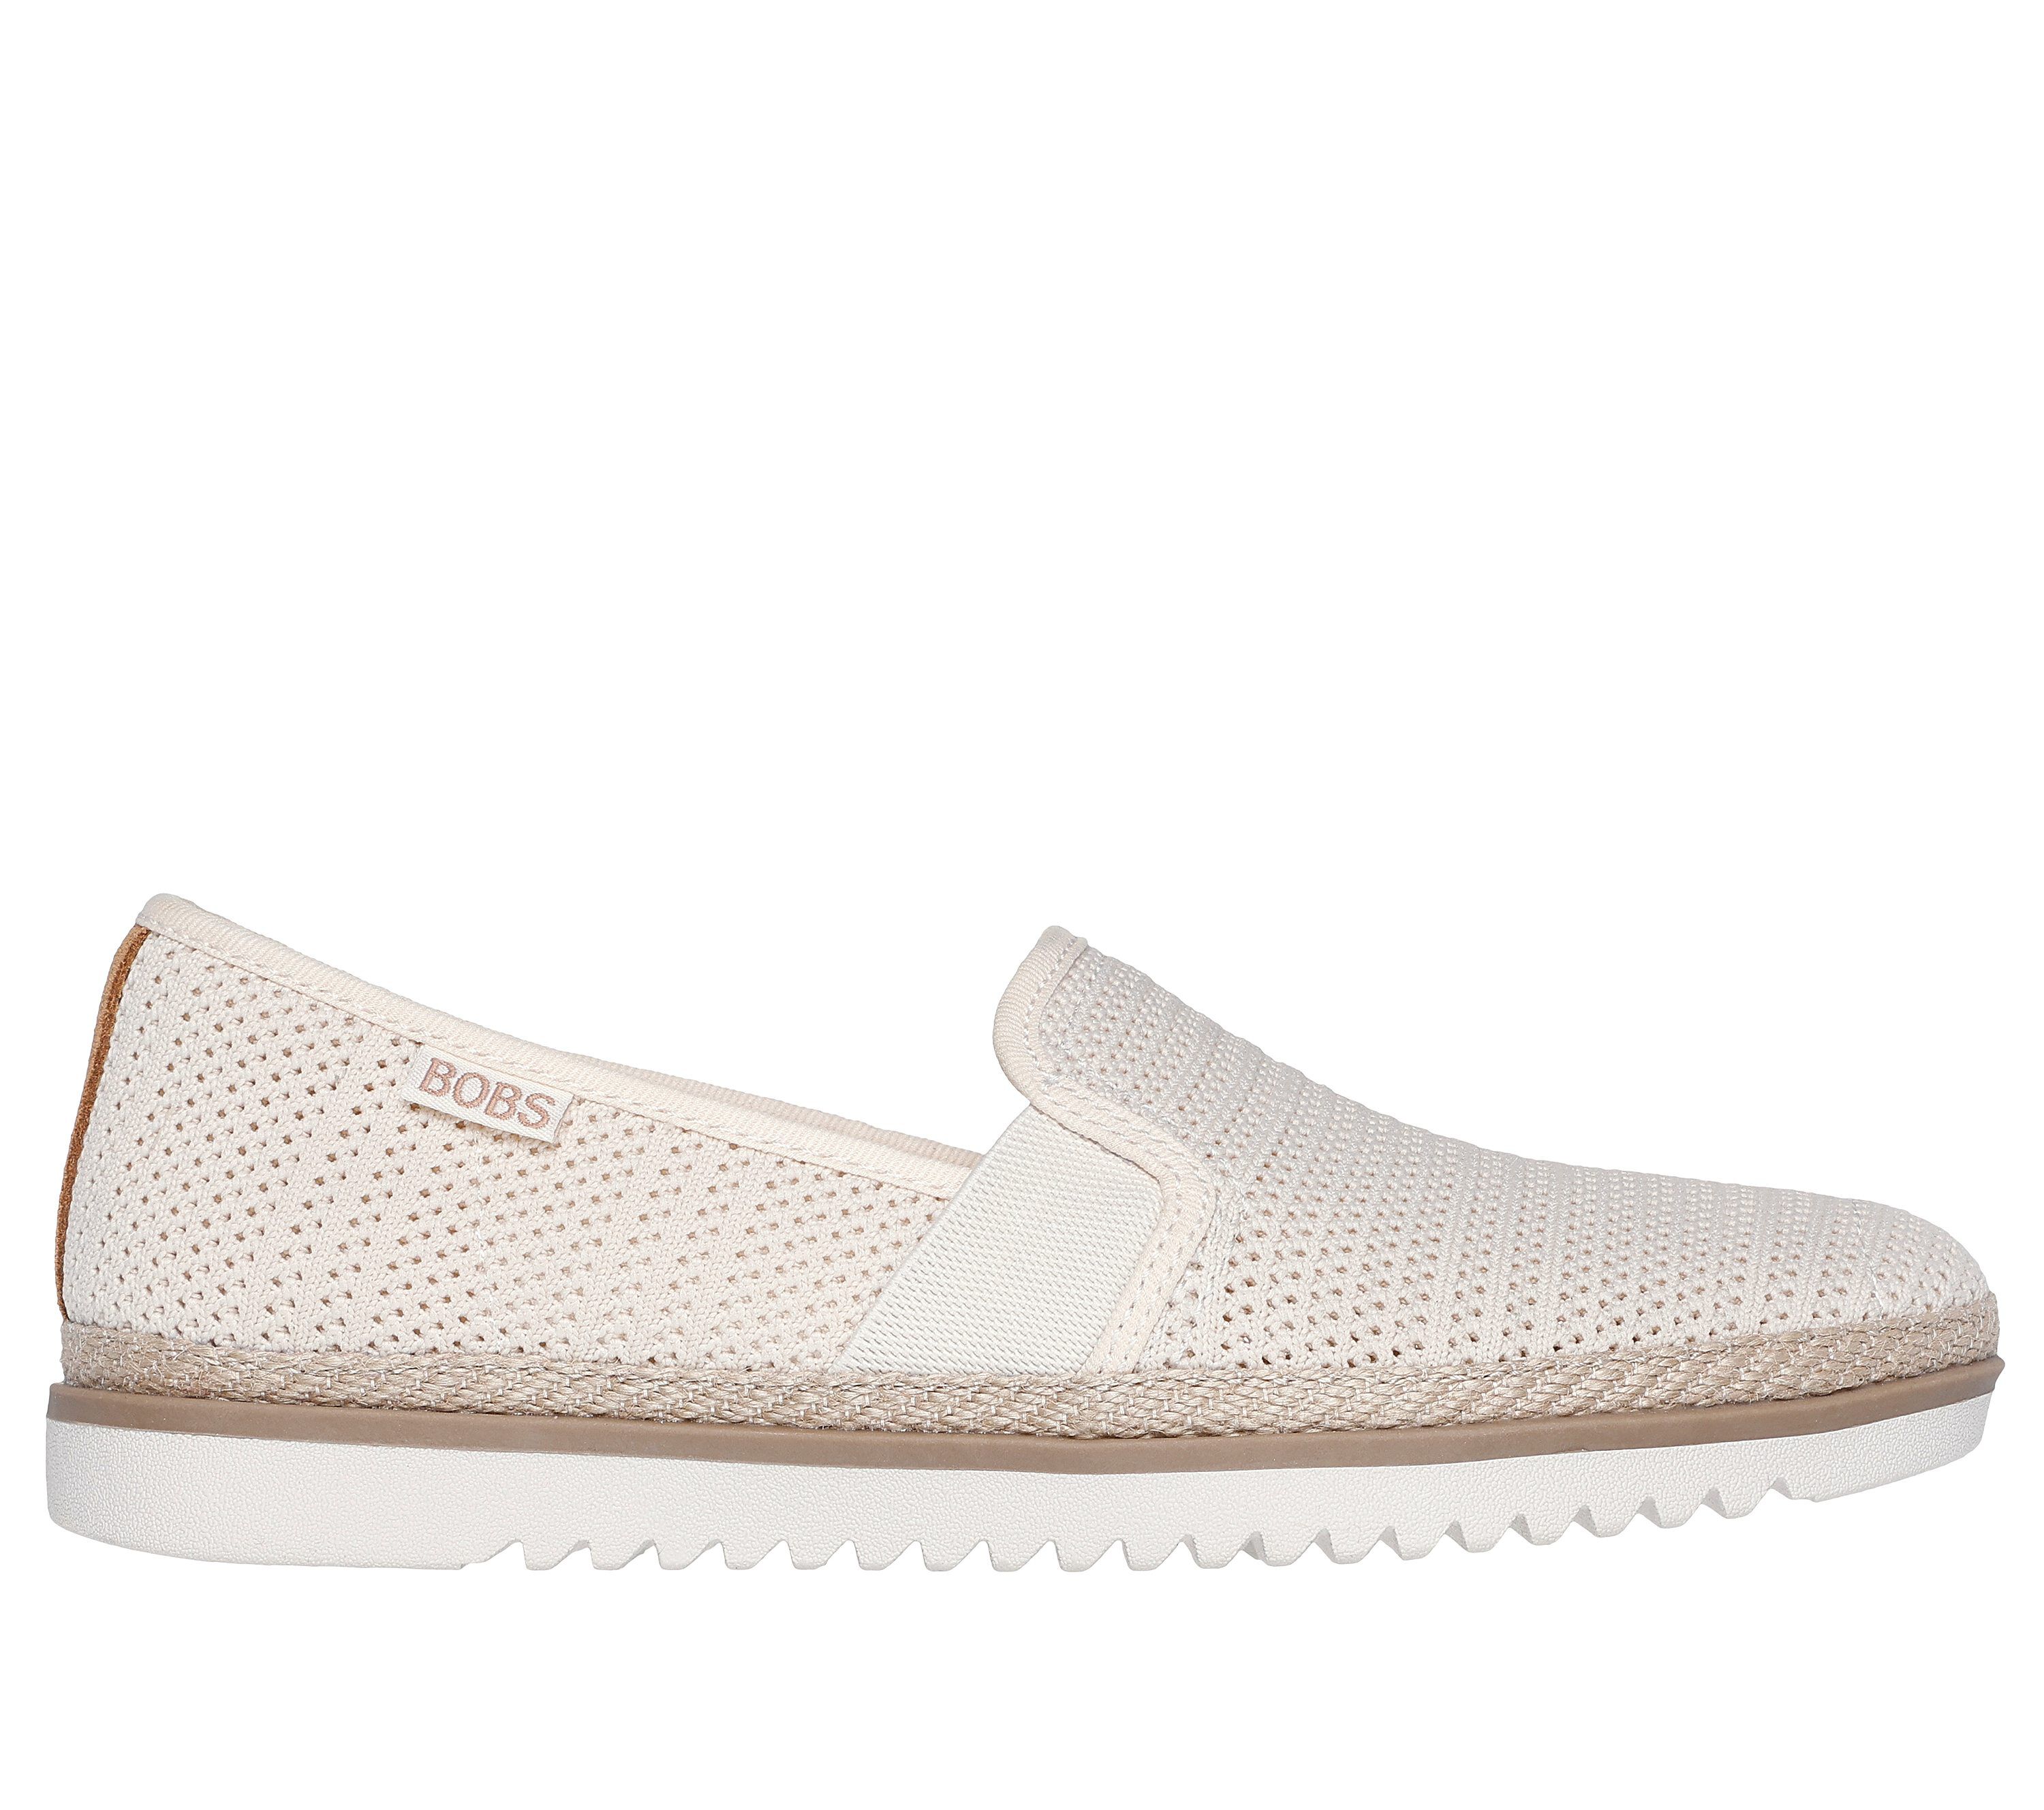 Shop the BOBS Flexpadrille Lo - Too Chic | SKECHERS CA